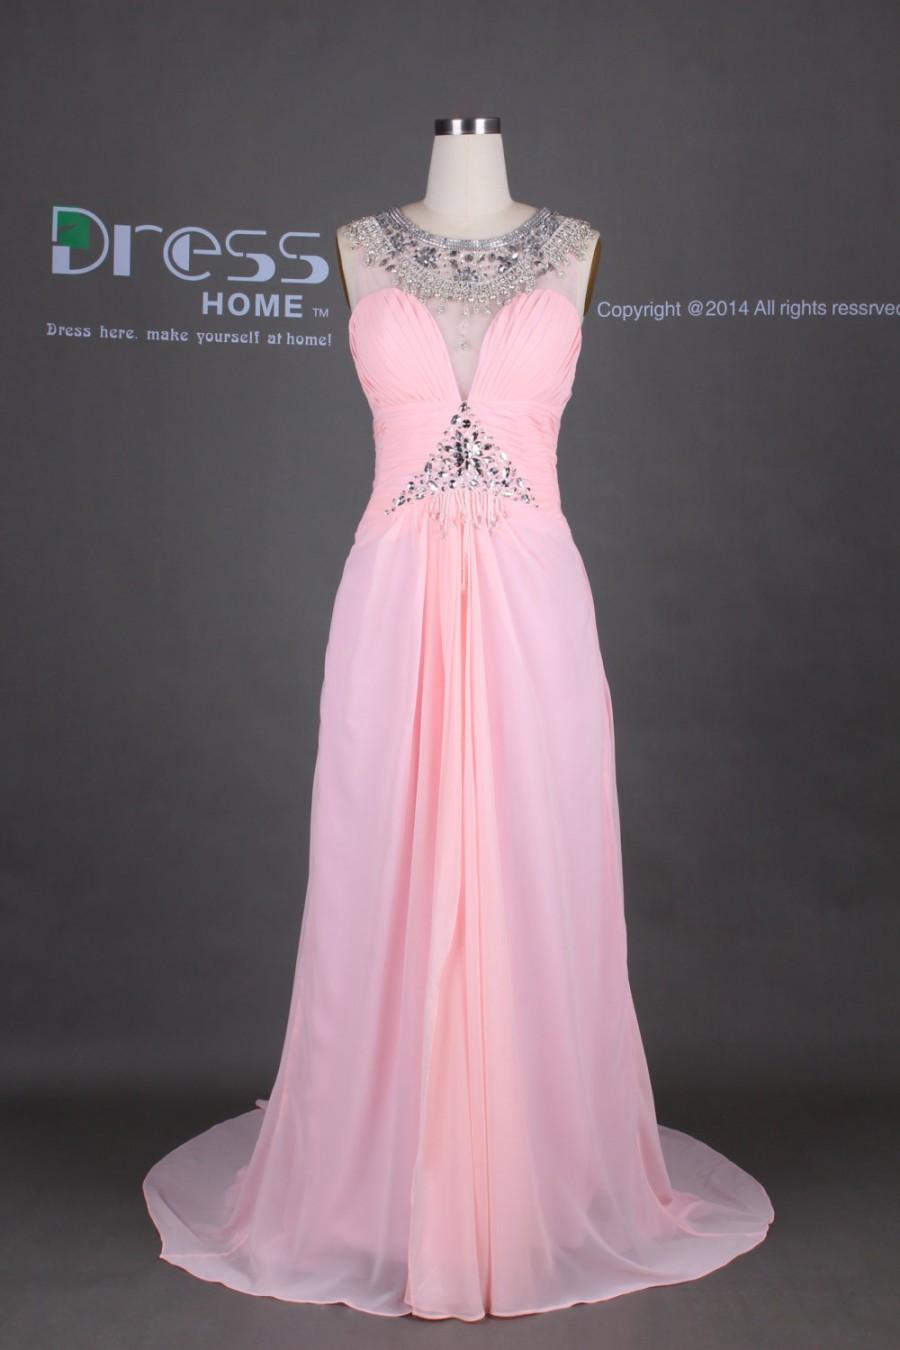 Hochzeit - Pink Round Neck Beading Long Prom Dress/See Through Open Back Chiffon Prom Dress/Sexy Long Party Dress/Evening Gown/Prom Dresses DH371